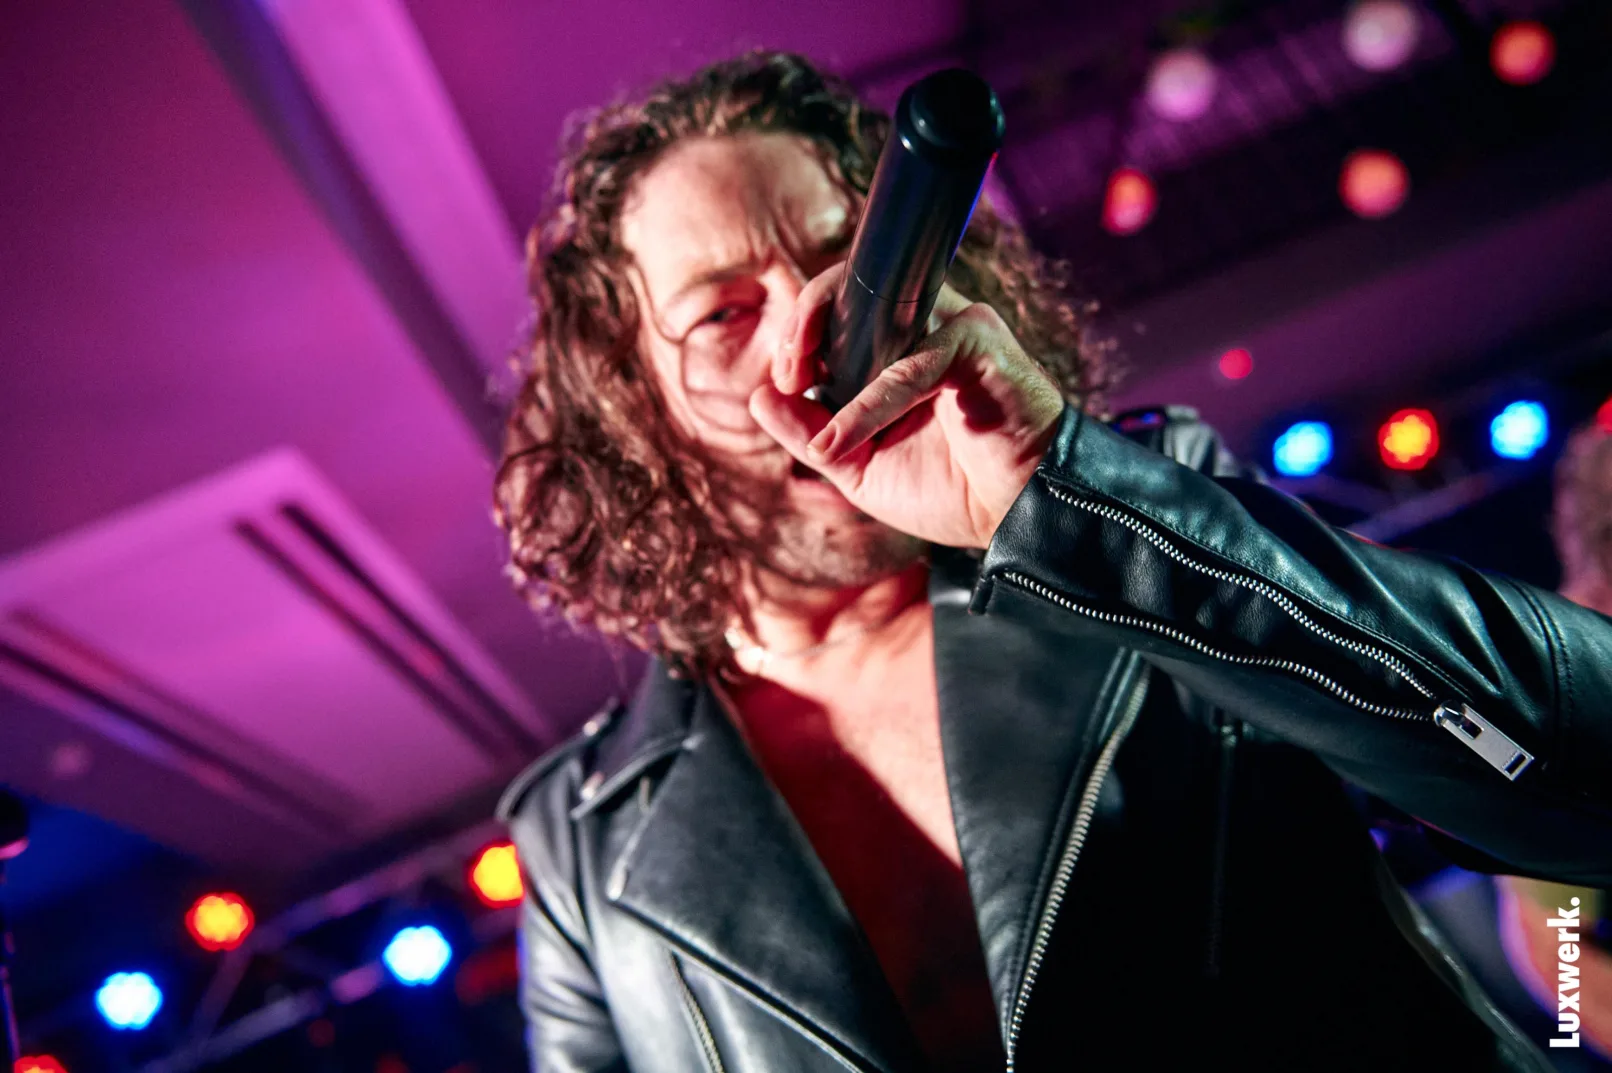 Singer from an INXS tribute band singing into the camera